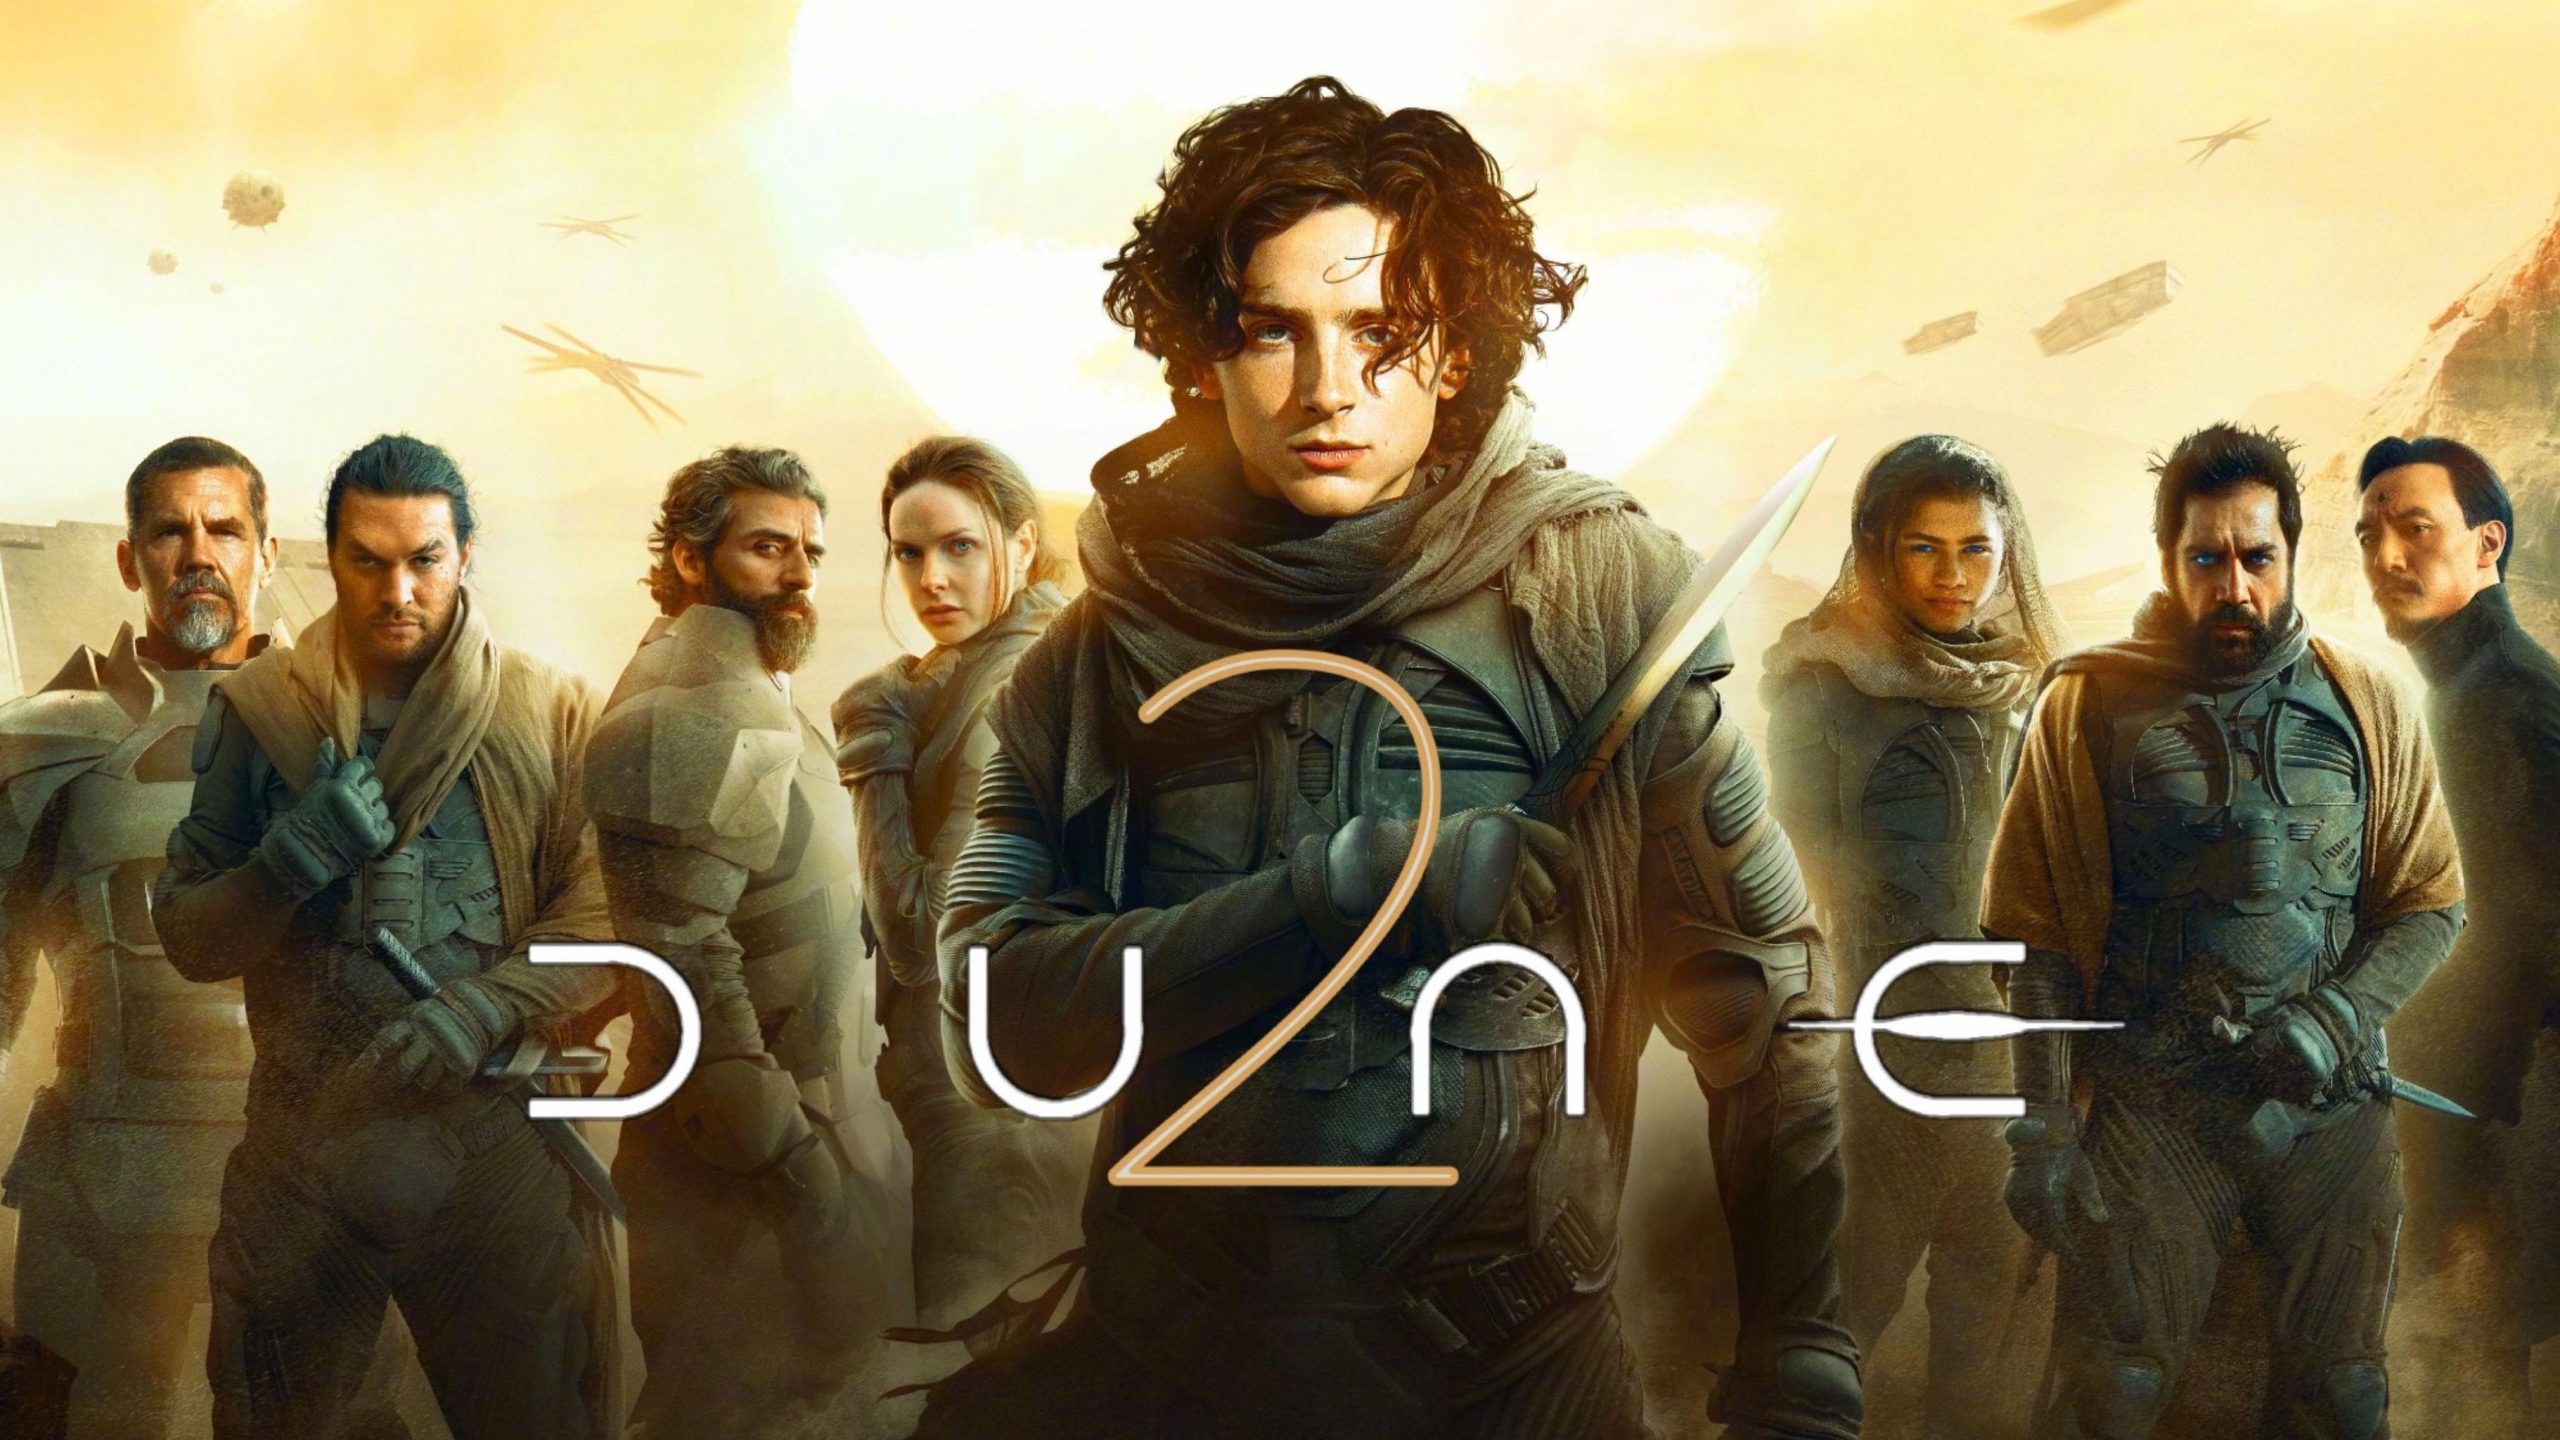 Dune Part 2 wallpaper Resolution 2560x1440 | Best Download this awesome wallpaper - Cool Wallpaper HD - CoolWallpaper-HD.com